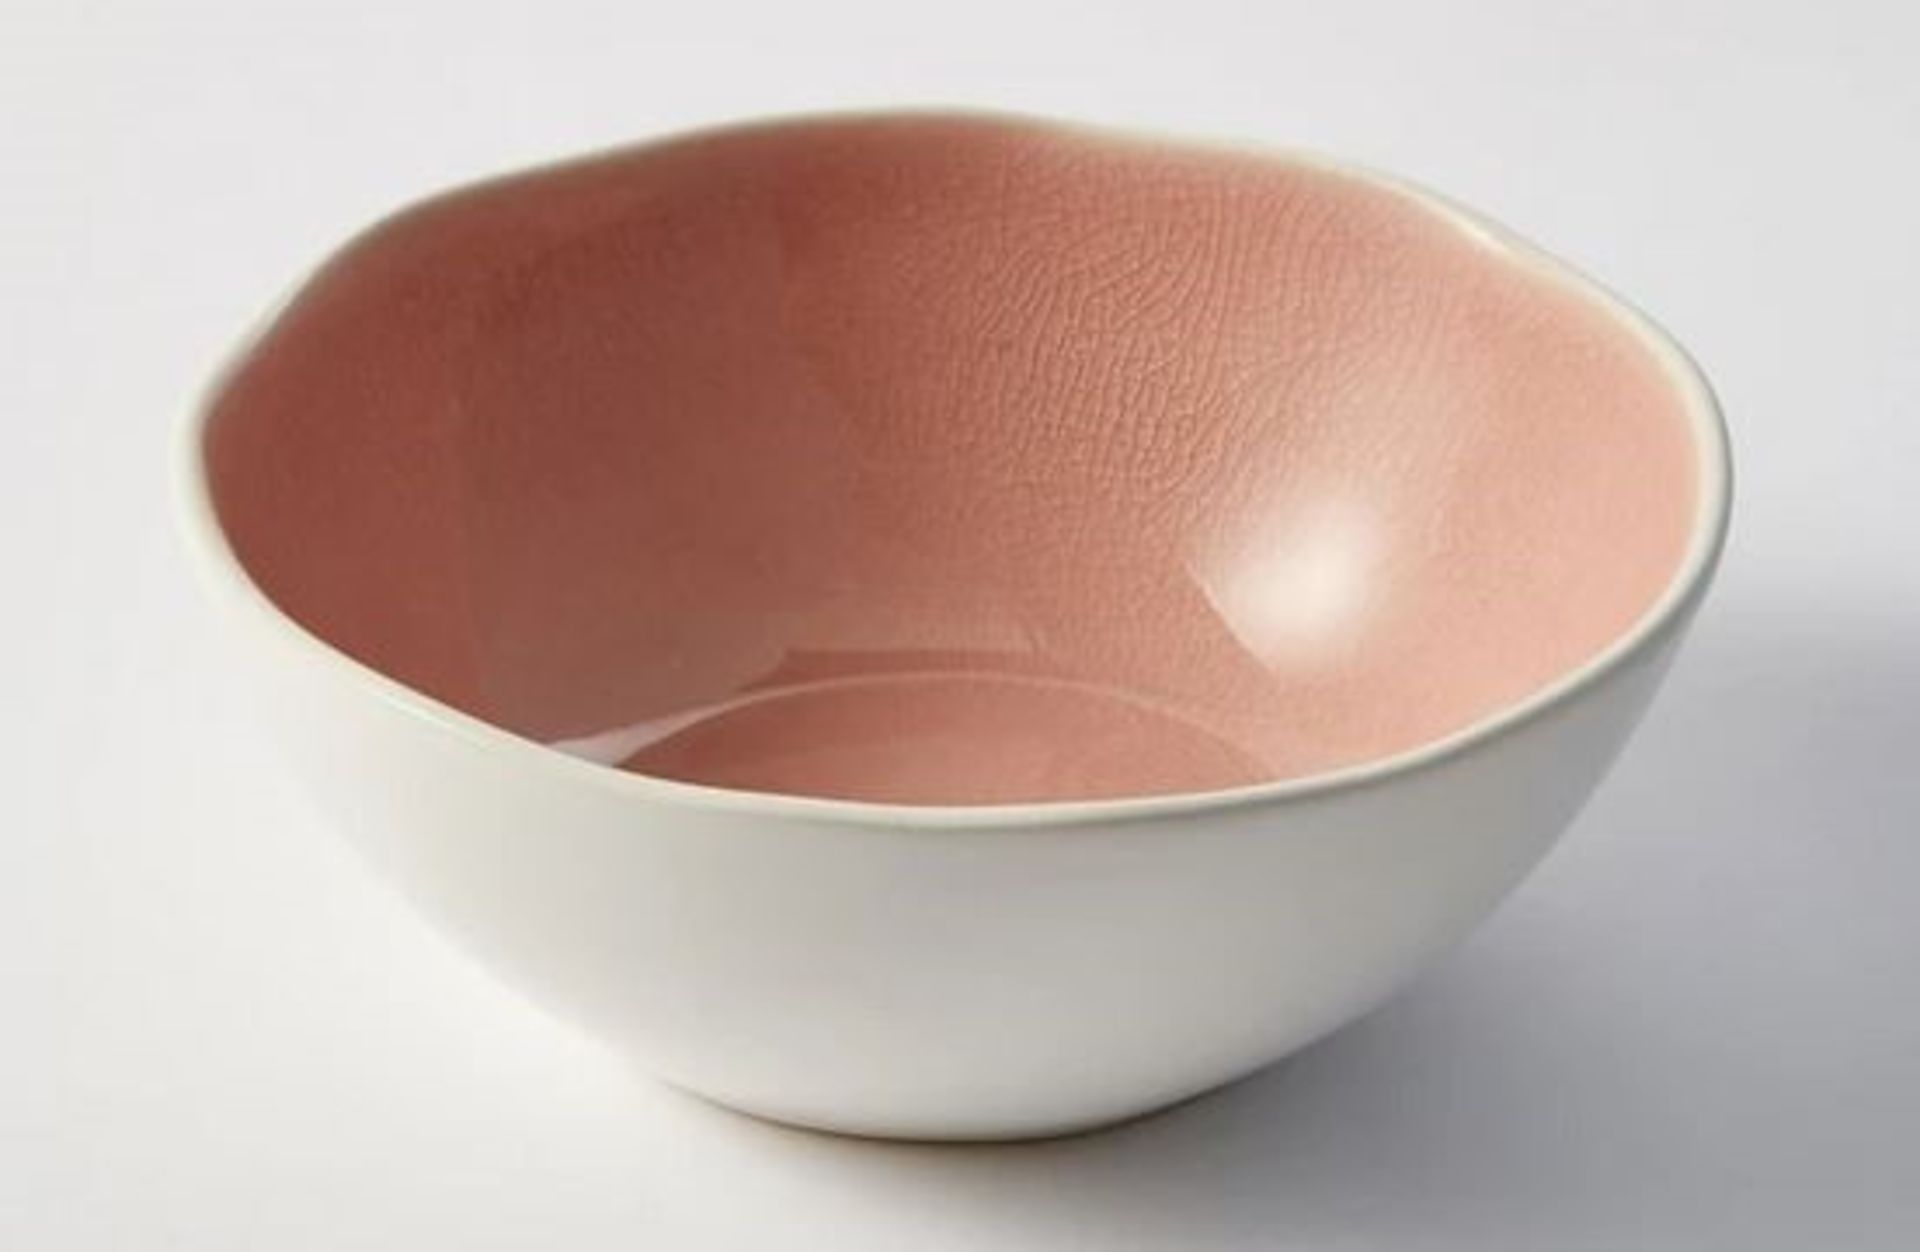 1 AS NEW LA REDOUTE SET OF 3 GOGAIN EARTHENWARE BOWLS IN DUSTY PINK / RRP £18.00 (VIEWING HIGHLY